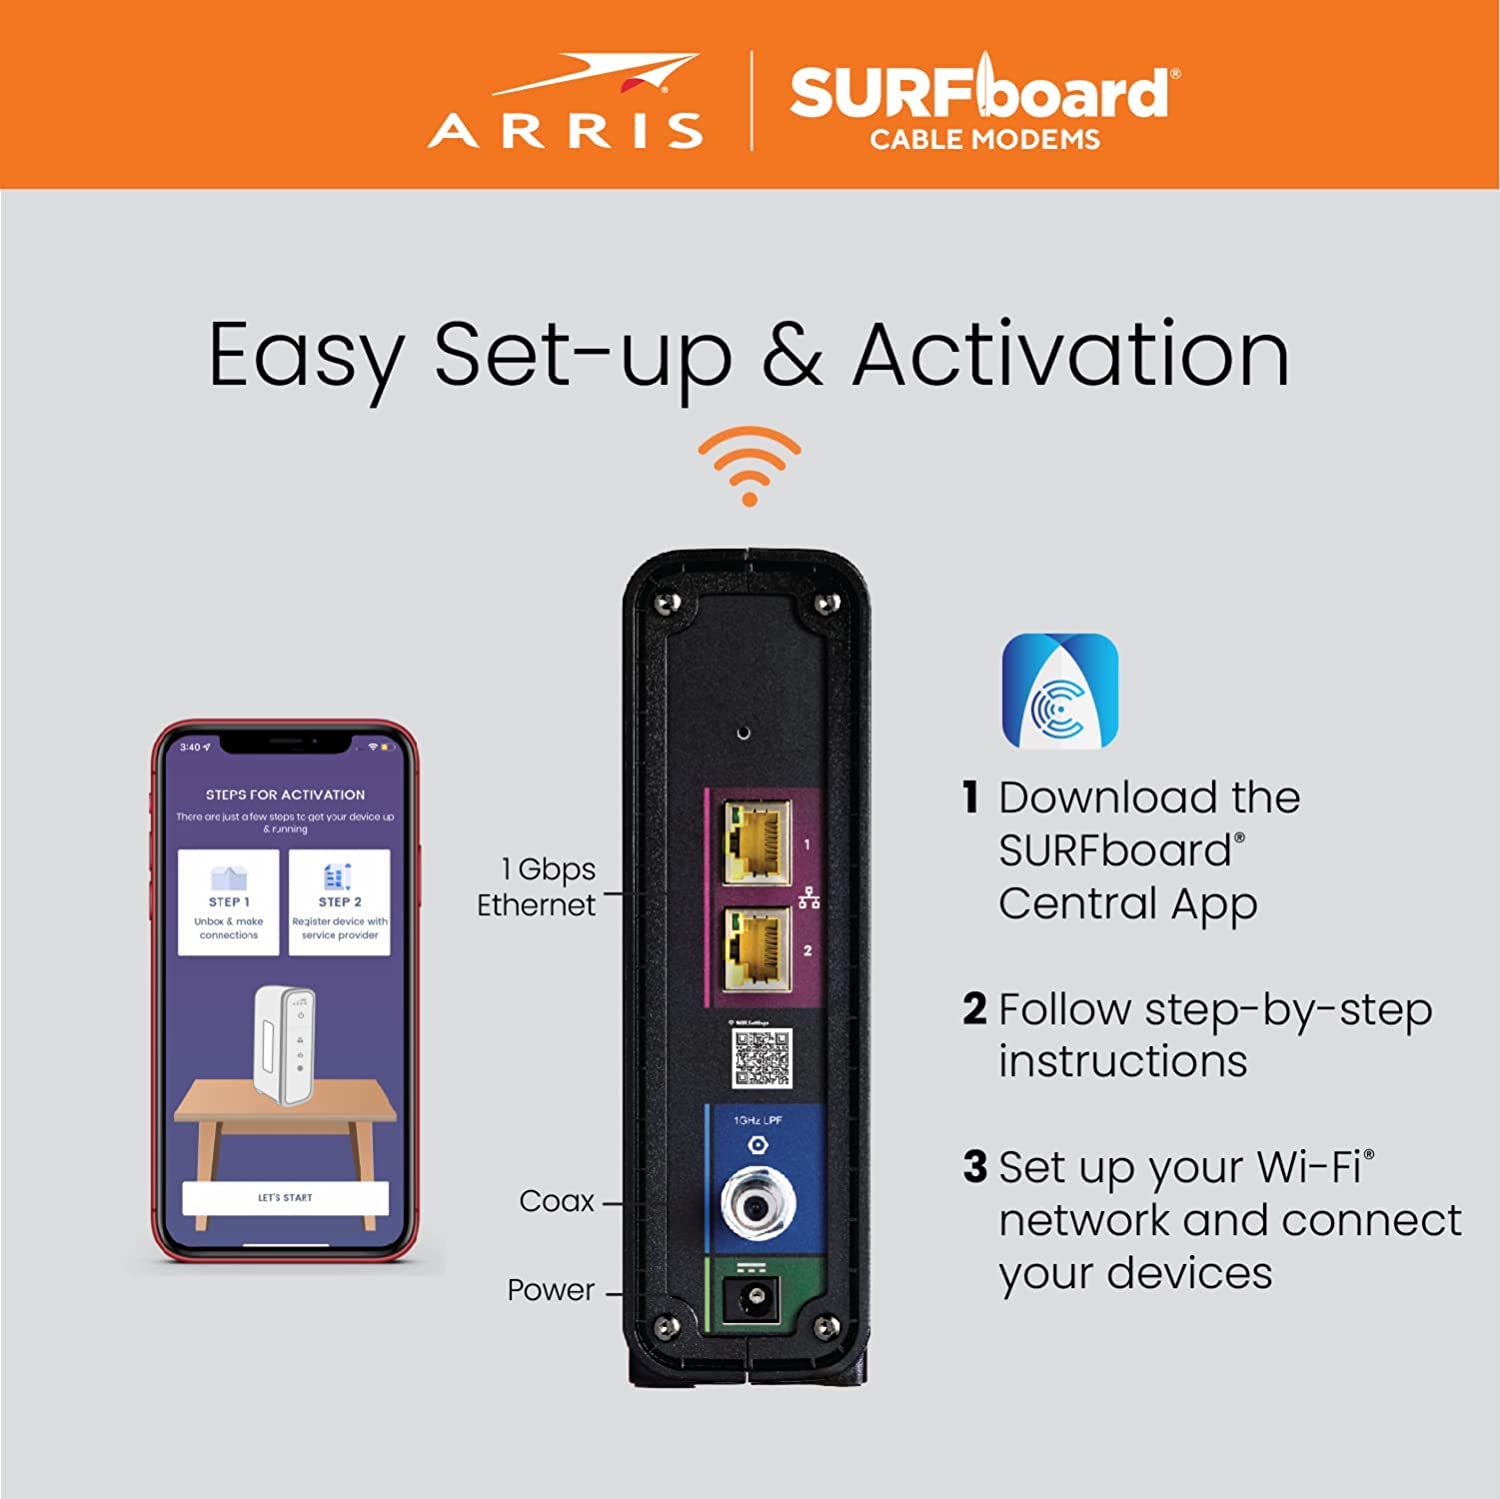 ARRIS Surfboard SBG10-RB DOCSIS 3.0 Cable Modem & AC1600 Dual Band Wi-Fi Router, Approved for Cox, Spectrum, Xfinity & Others (RENEWED)